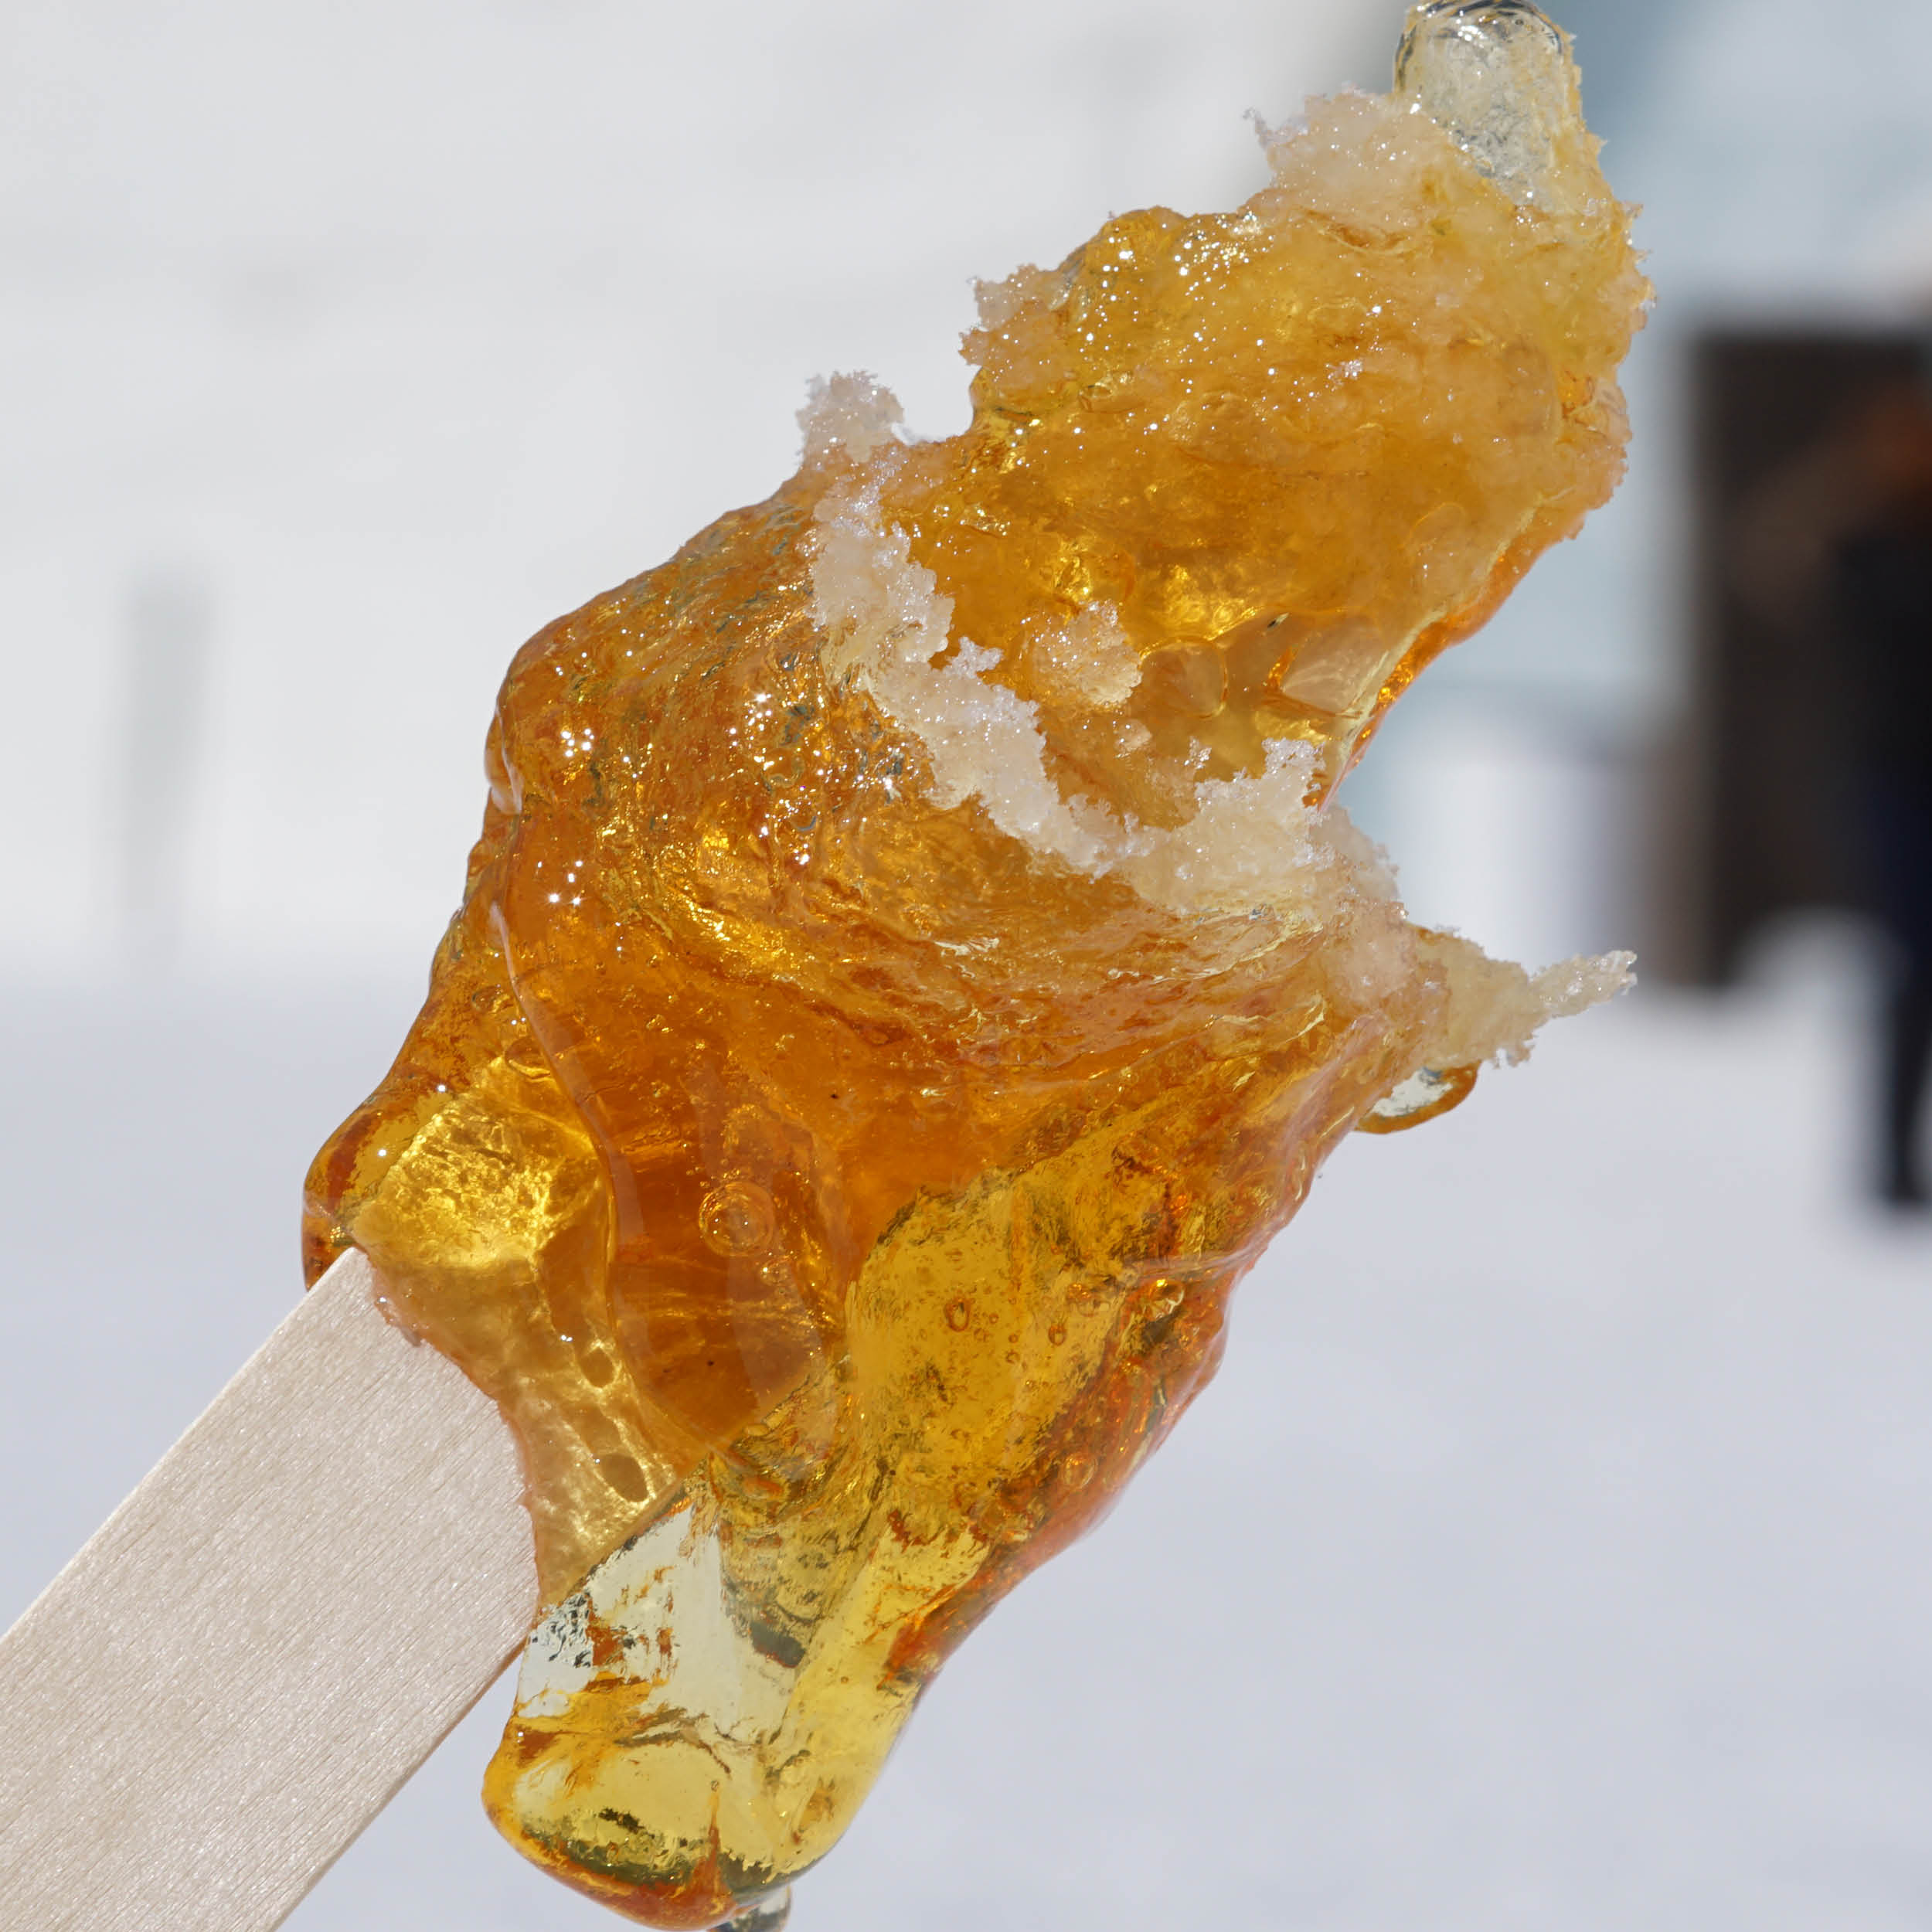 Maple Taffy is a delicious winter treat in Quebec